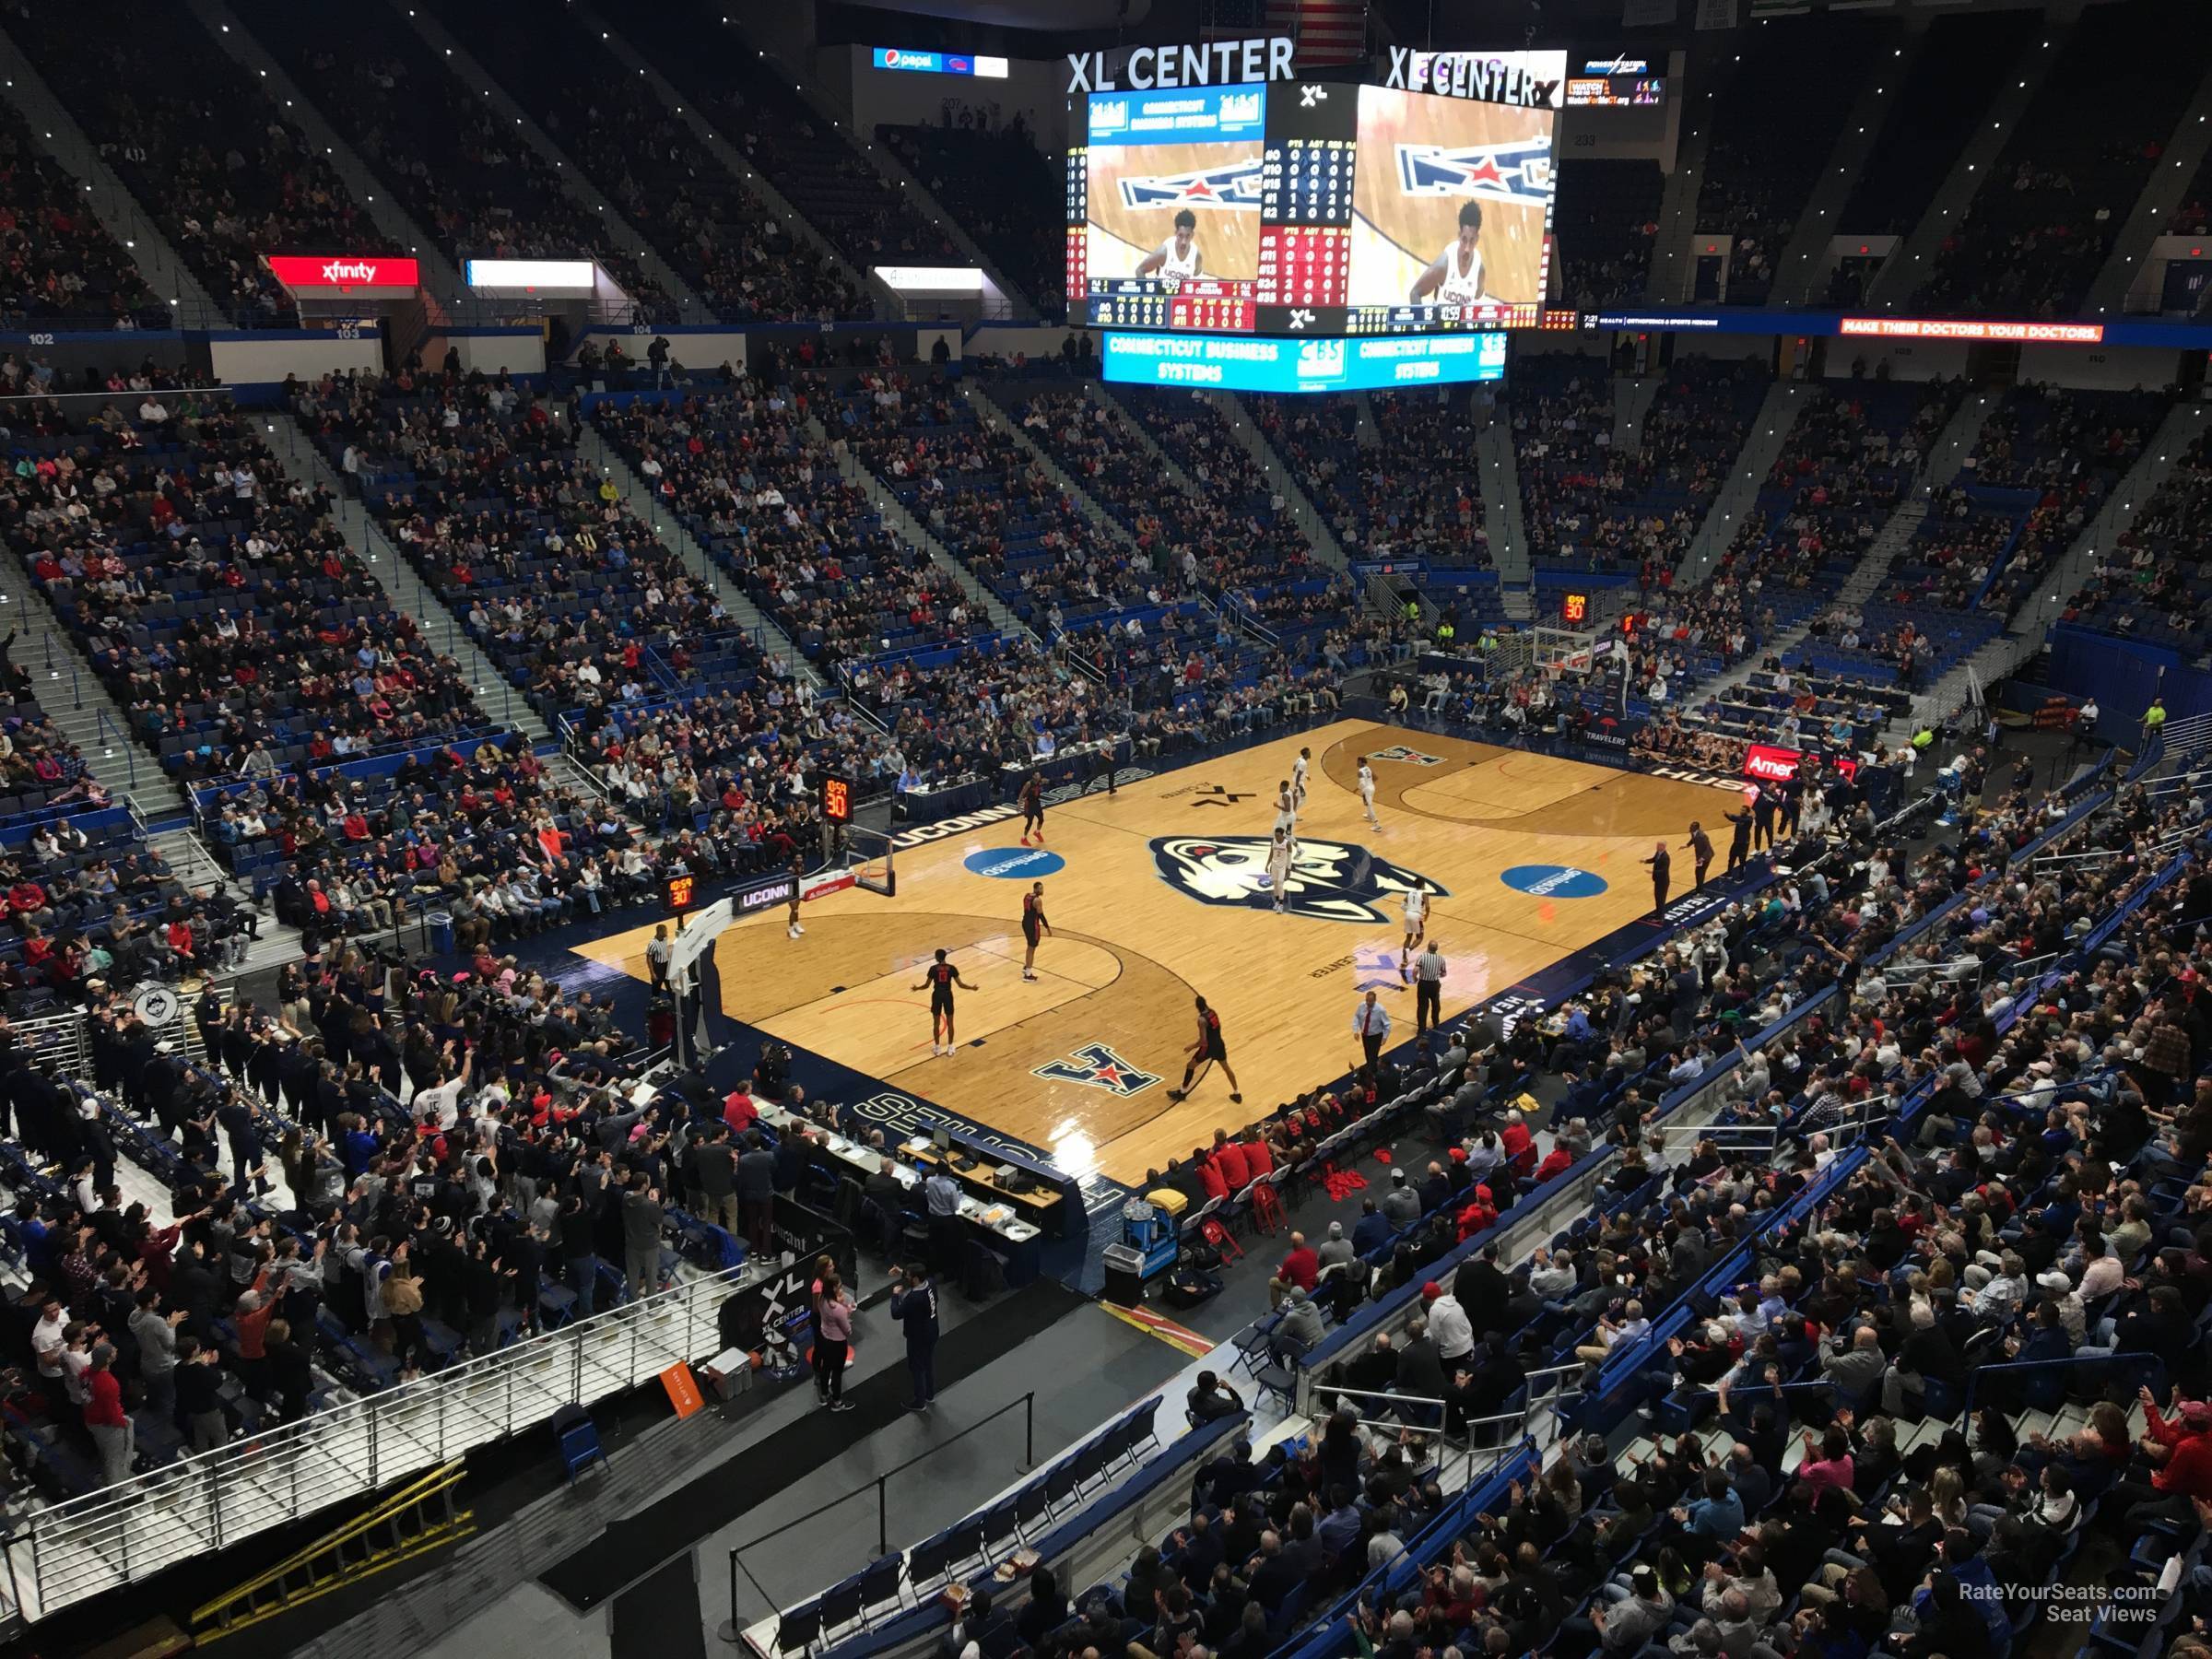 section 220, row a seat view  - xl center